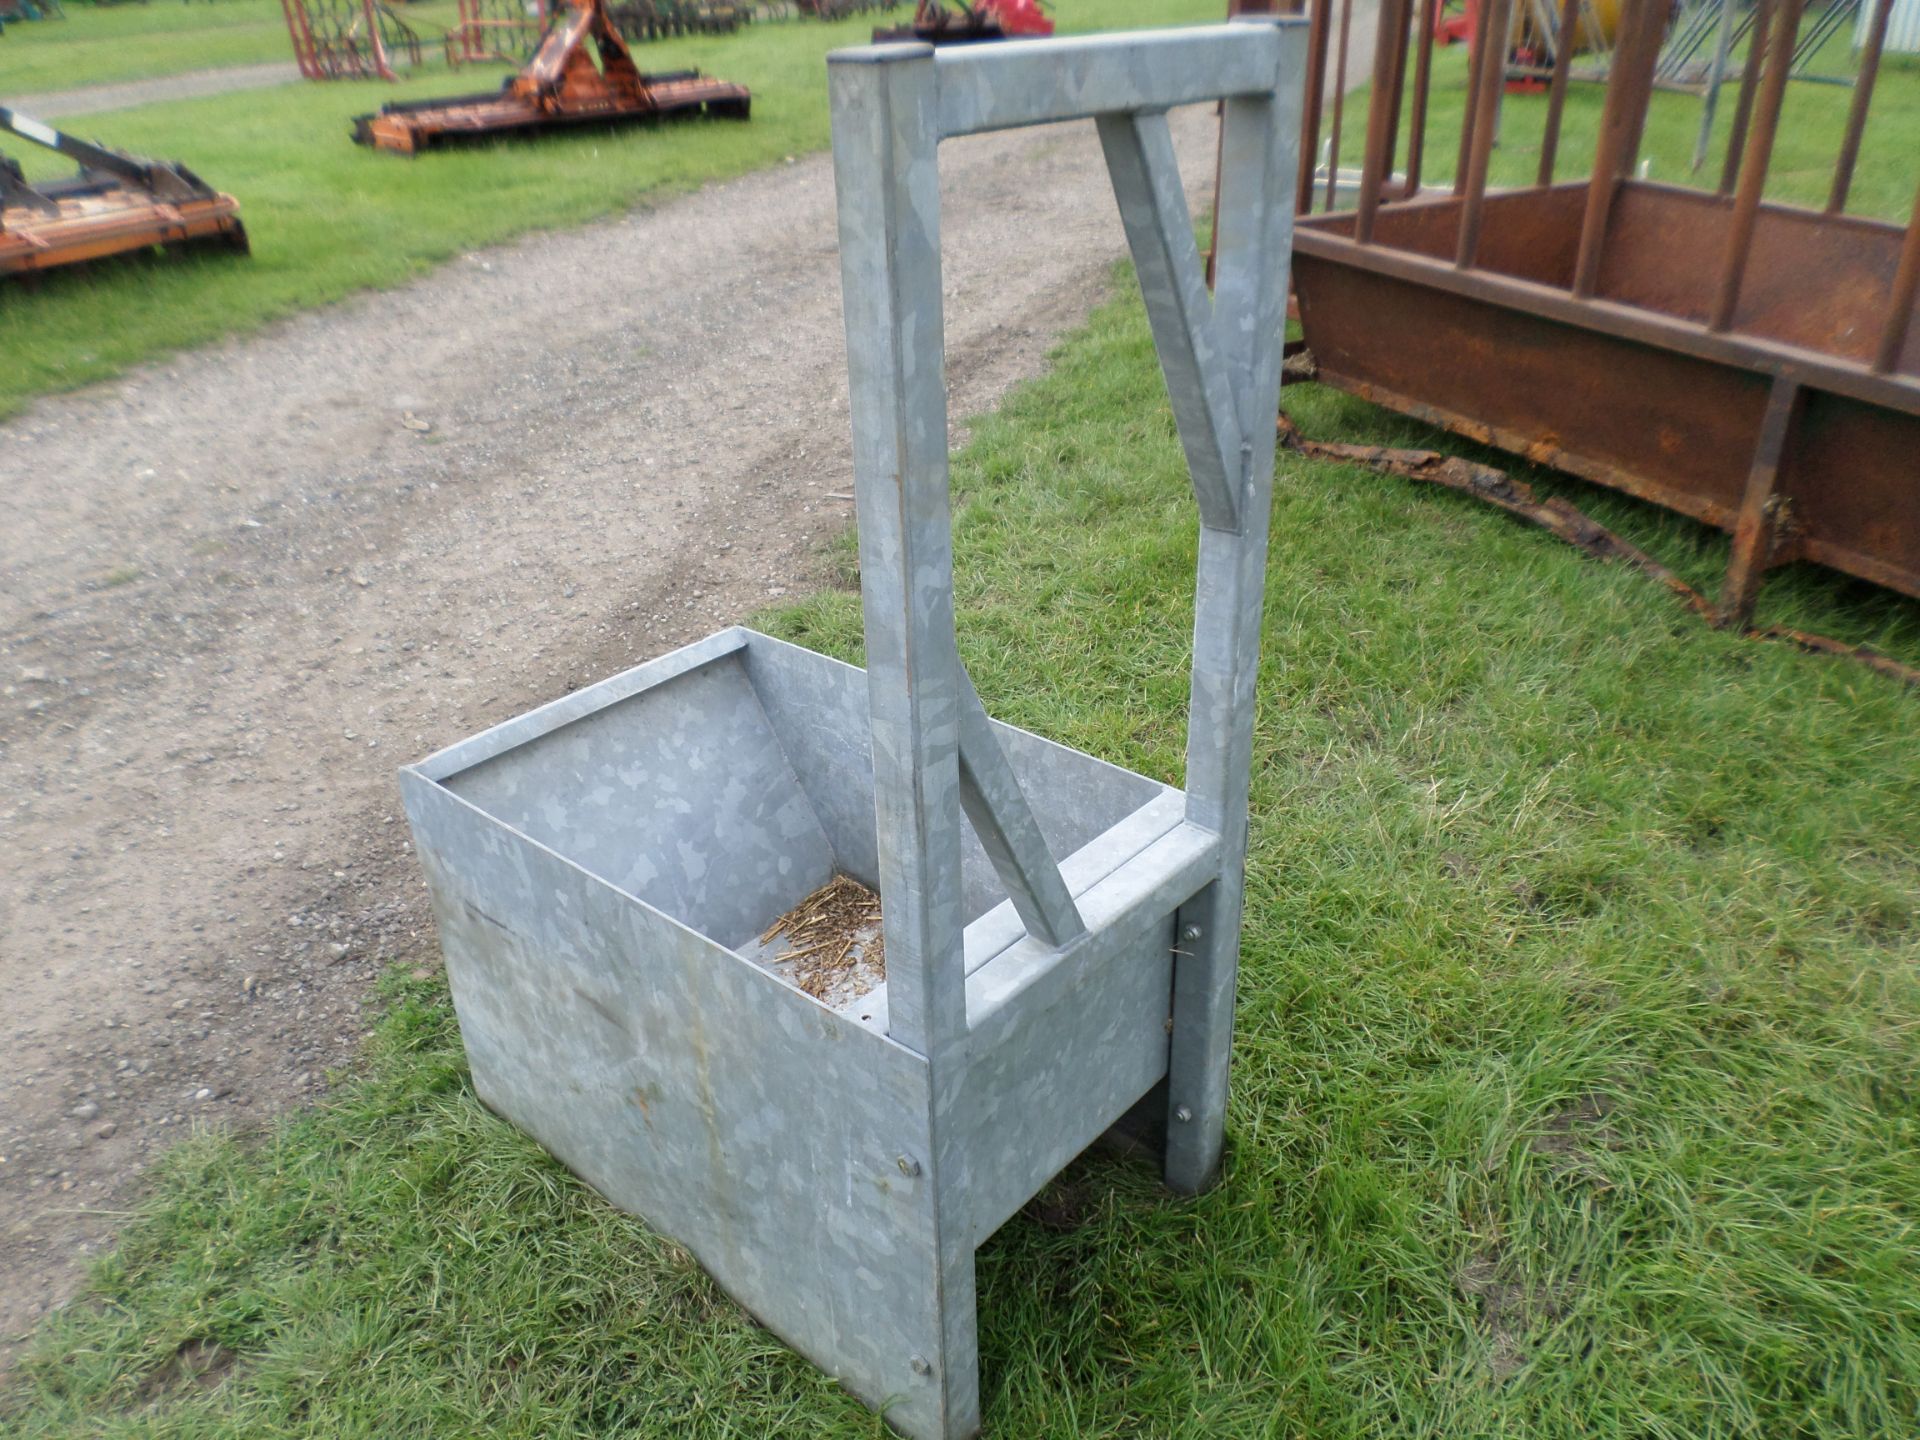 Cattle trough - Image 2 of 2